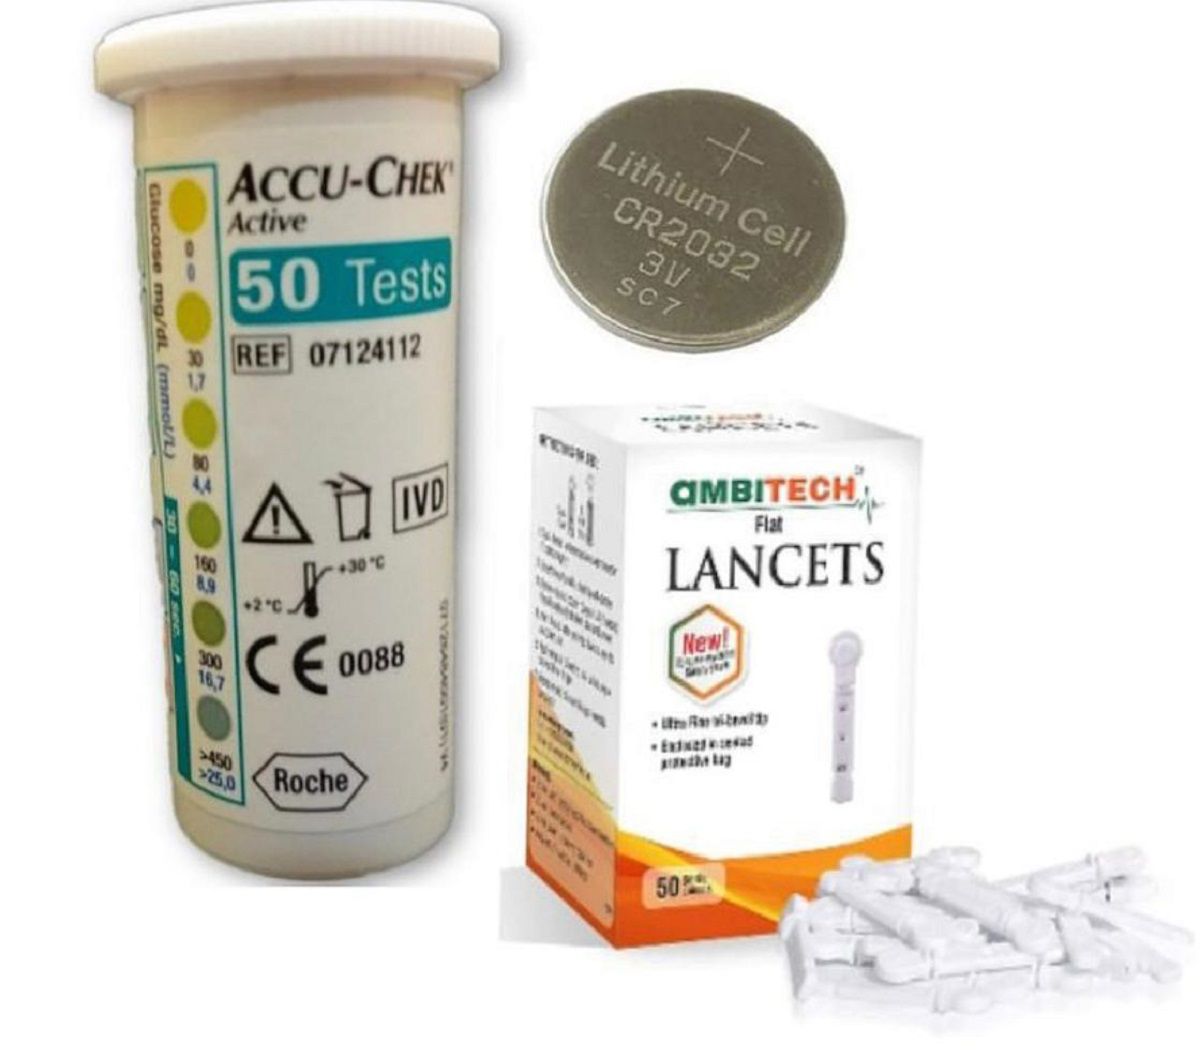 Accu-Chek Active 50 Sugar Test Strips + 50 Lancets with One One Battery Expiry Dec 2023